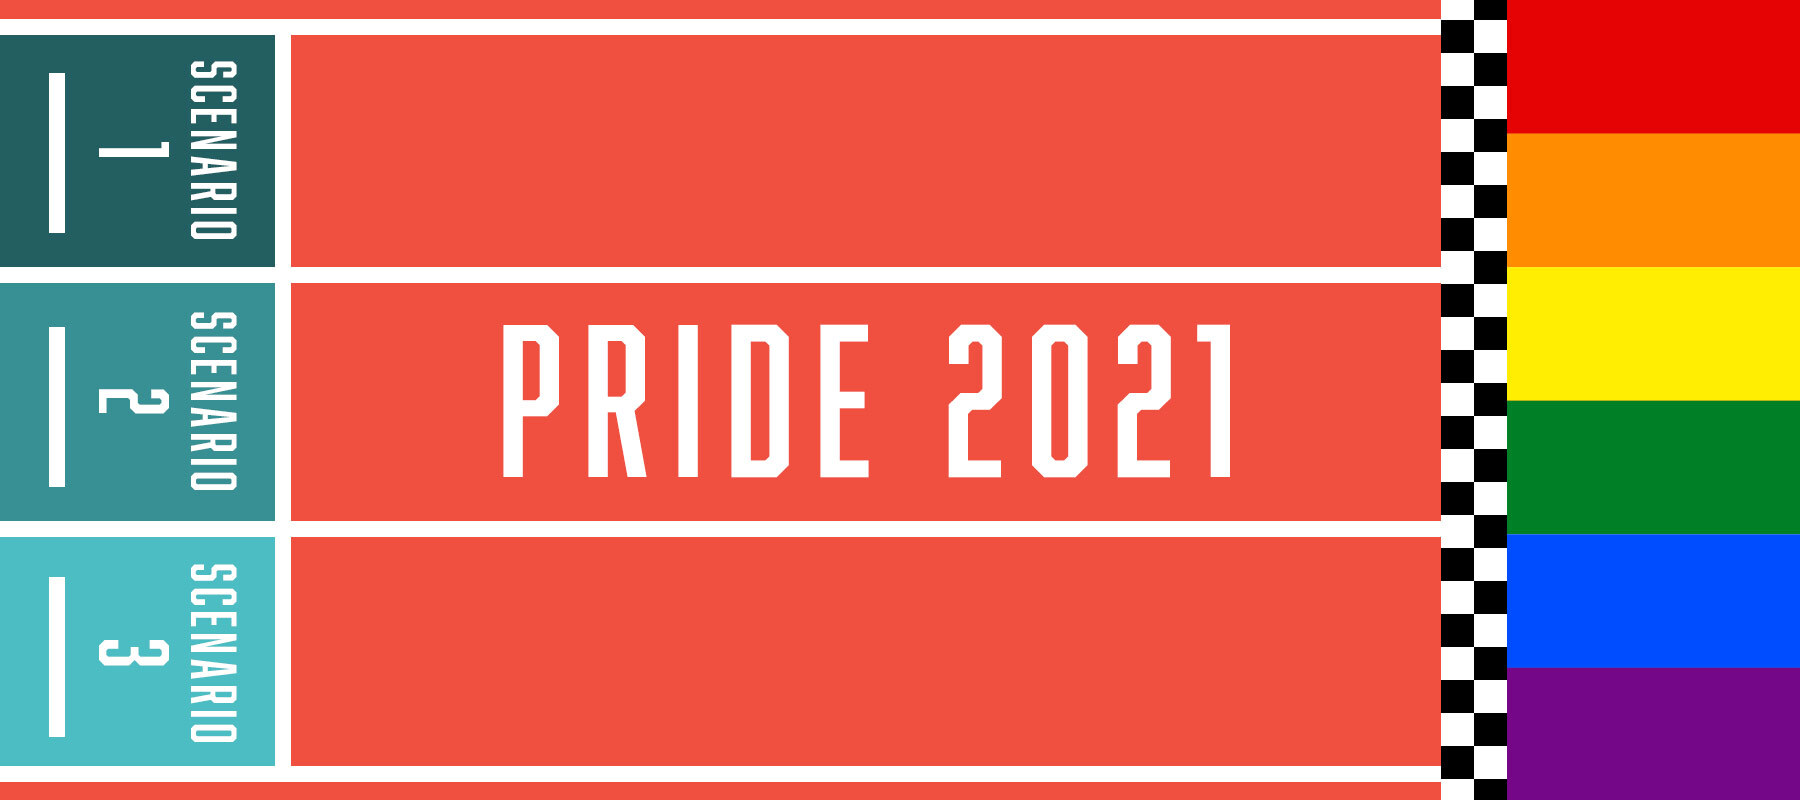 How to Plan for Pride 2021